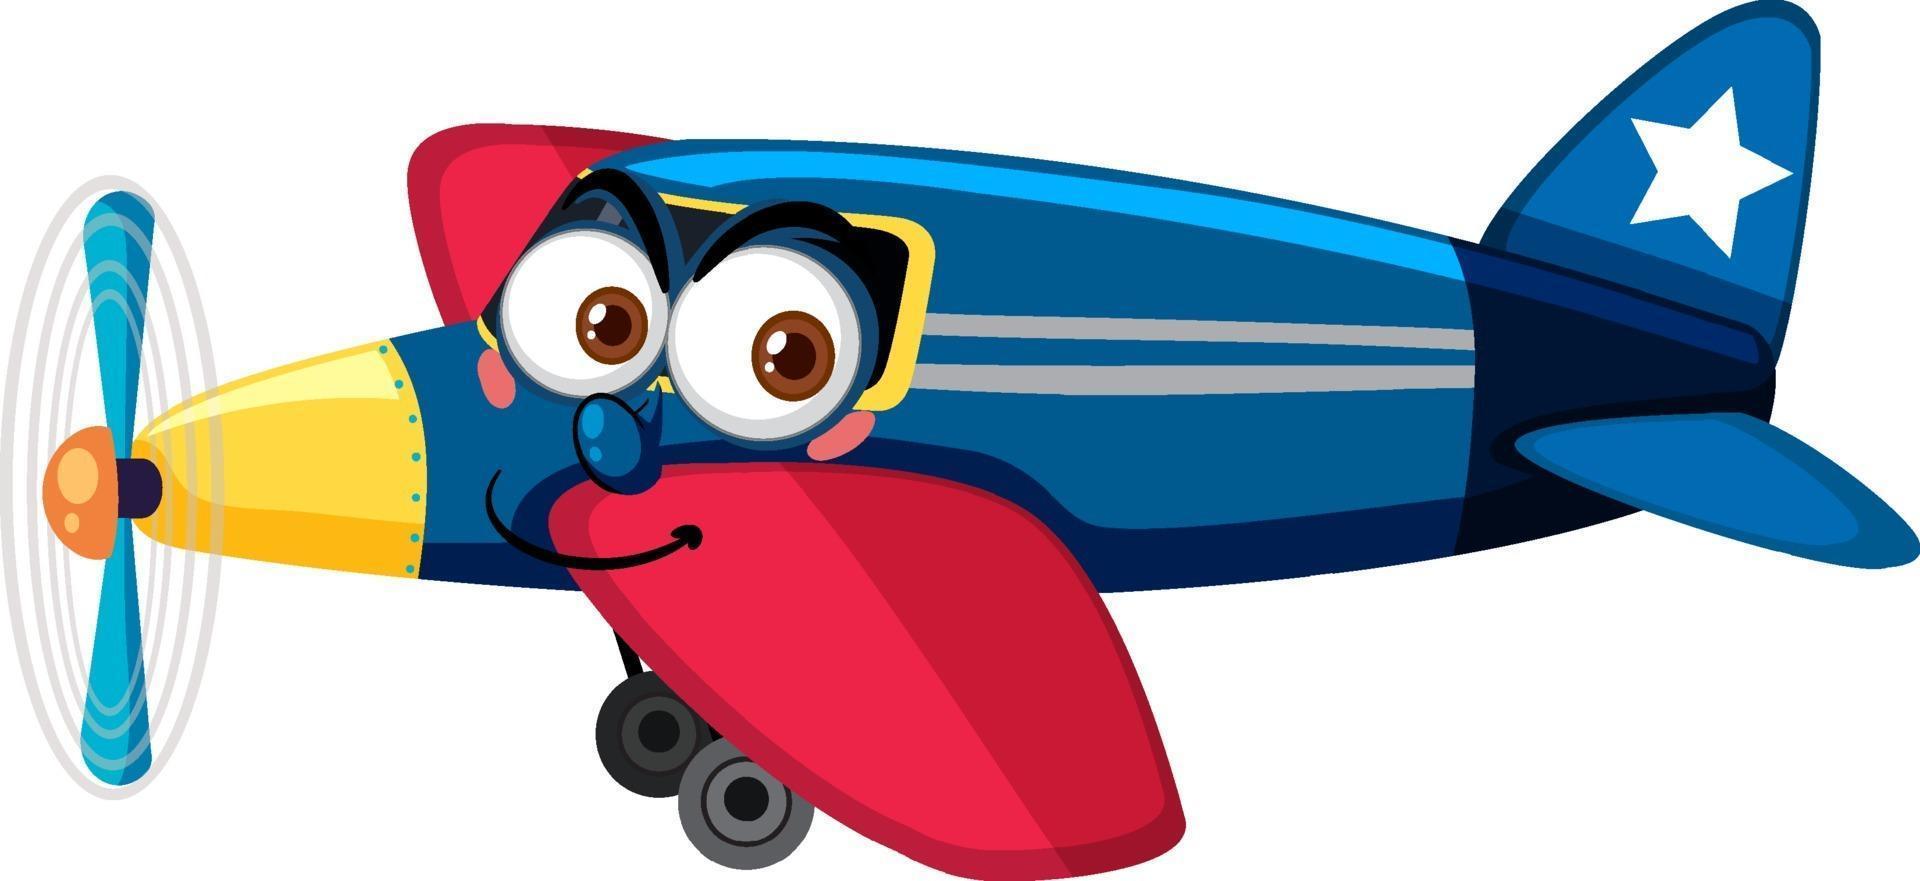 Airplane with face expression cartoon character on white background vector